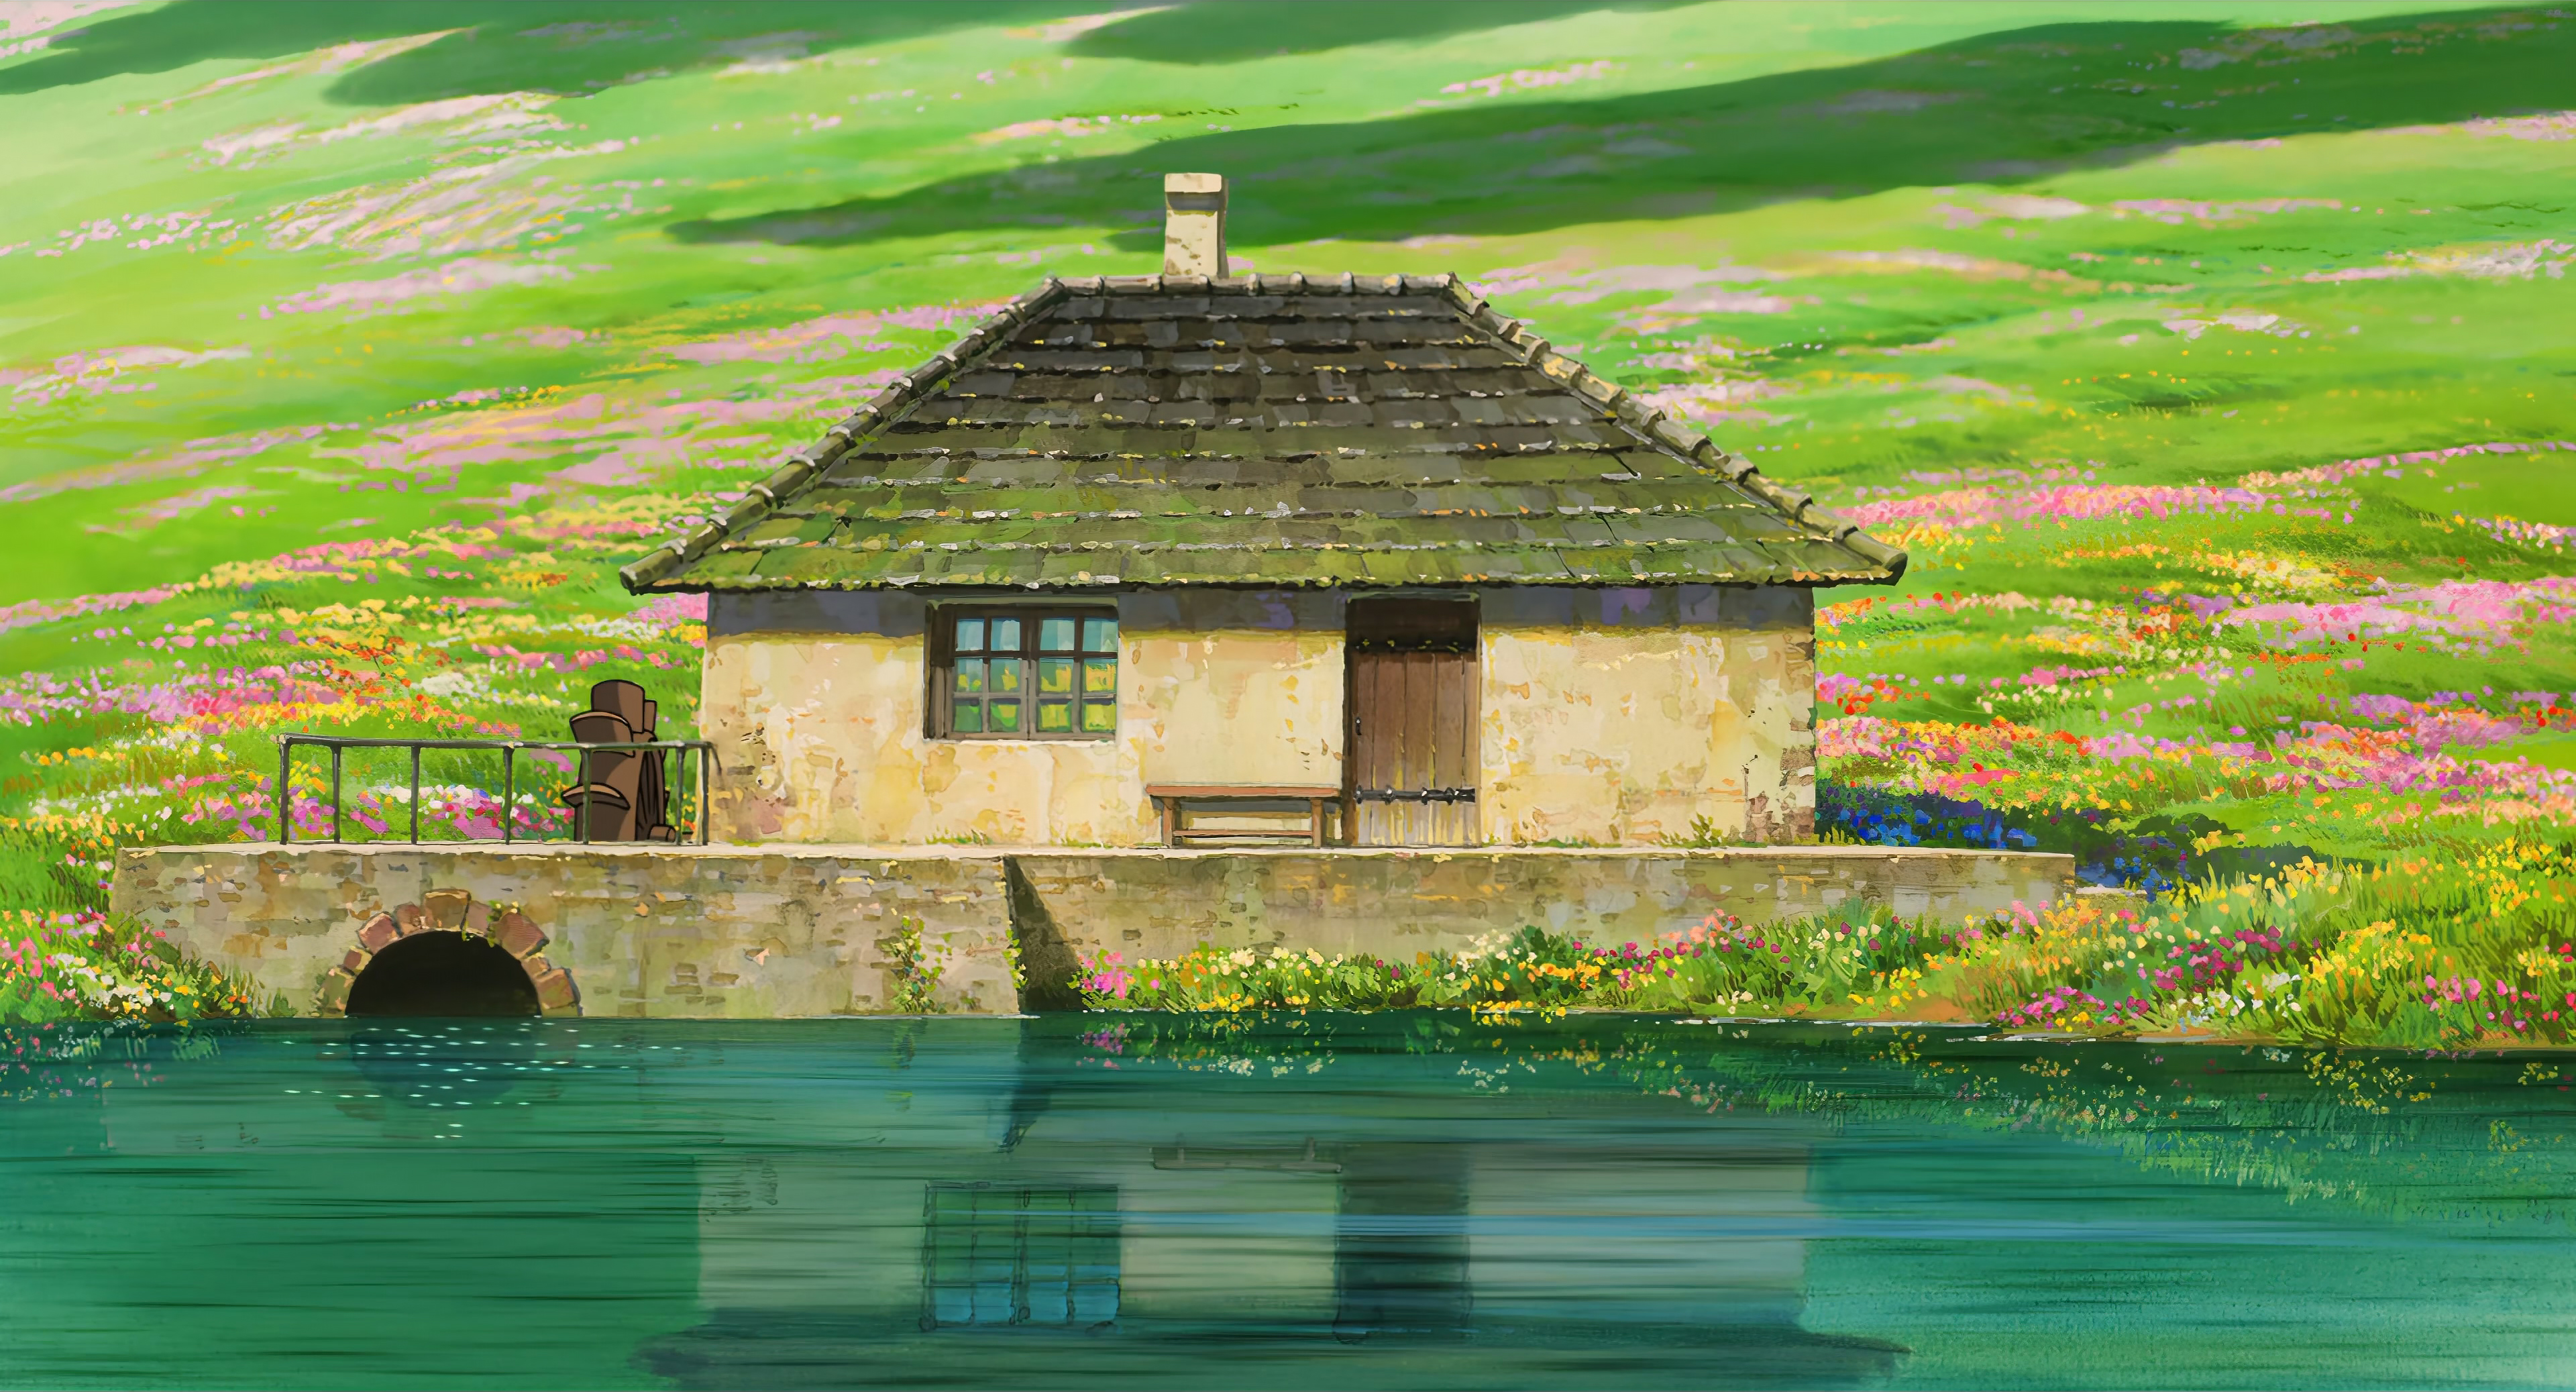 Anime 3840x2075 Howl's Moving Castle Studio Ghibli anime house field plants reflection water